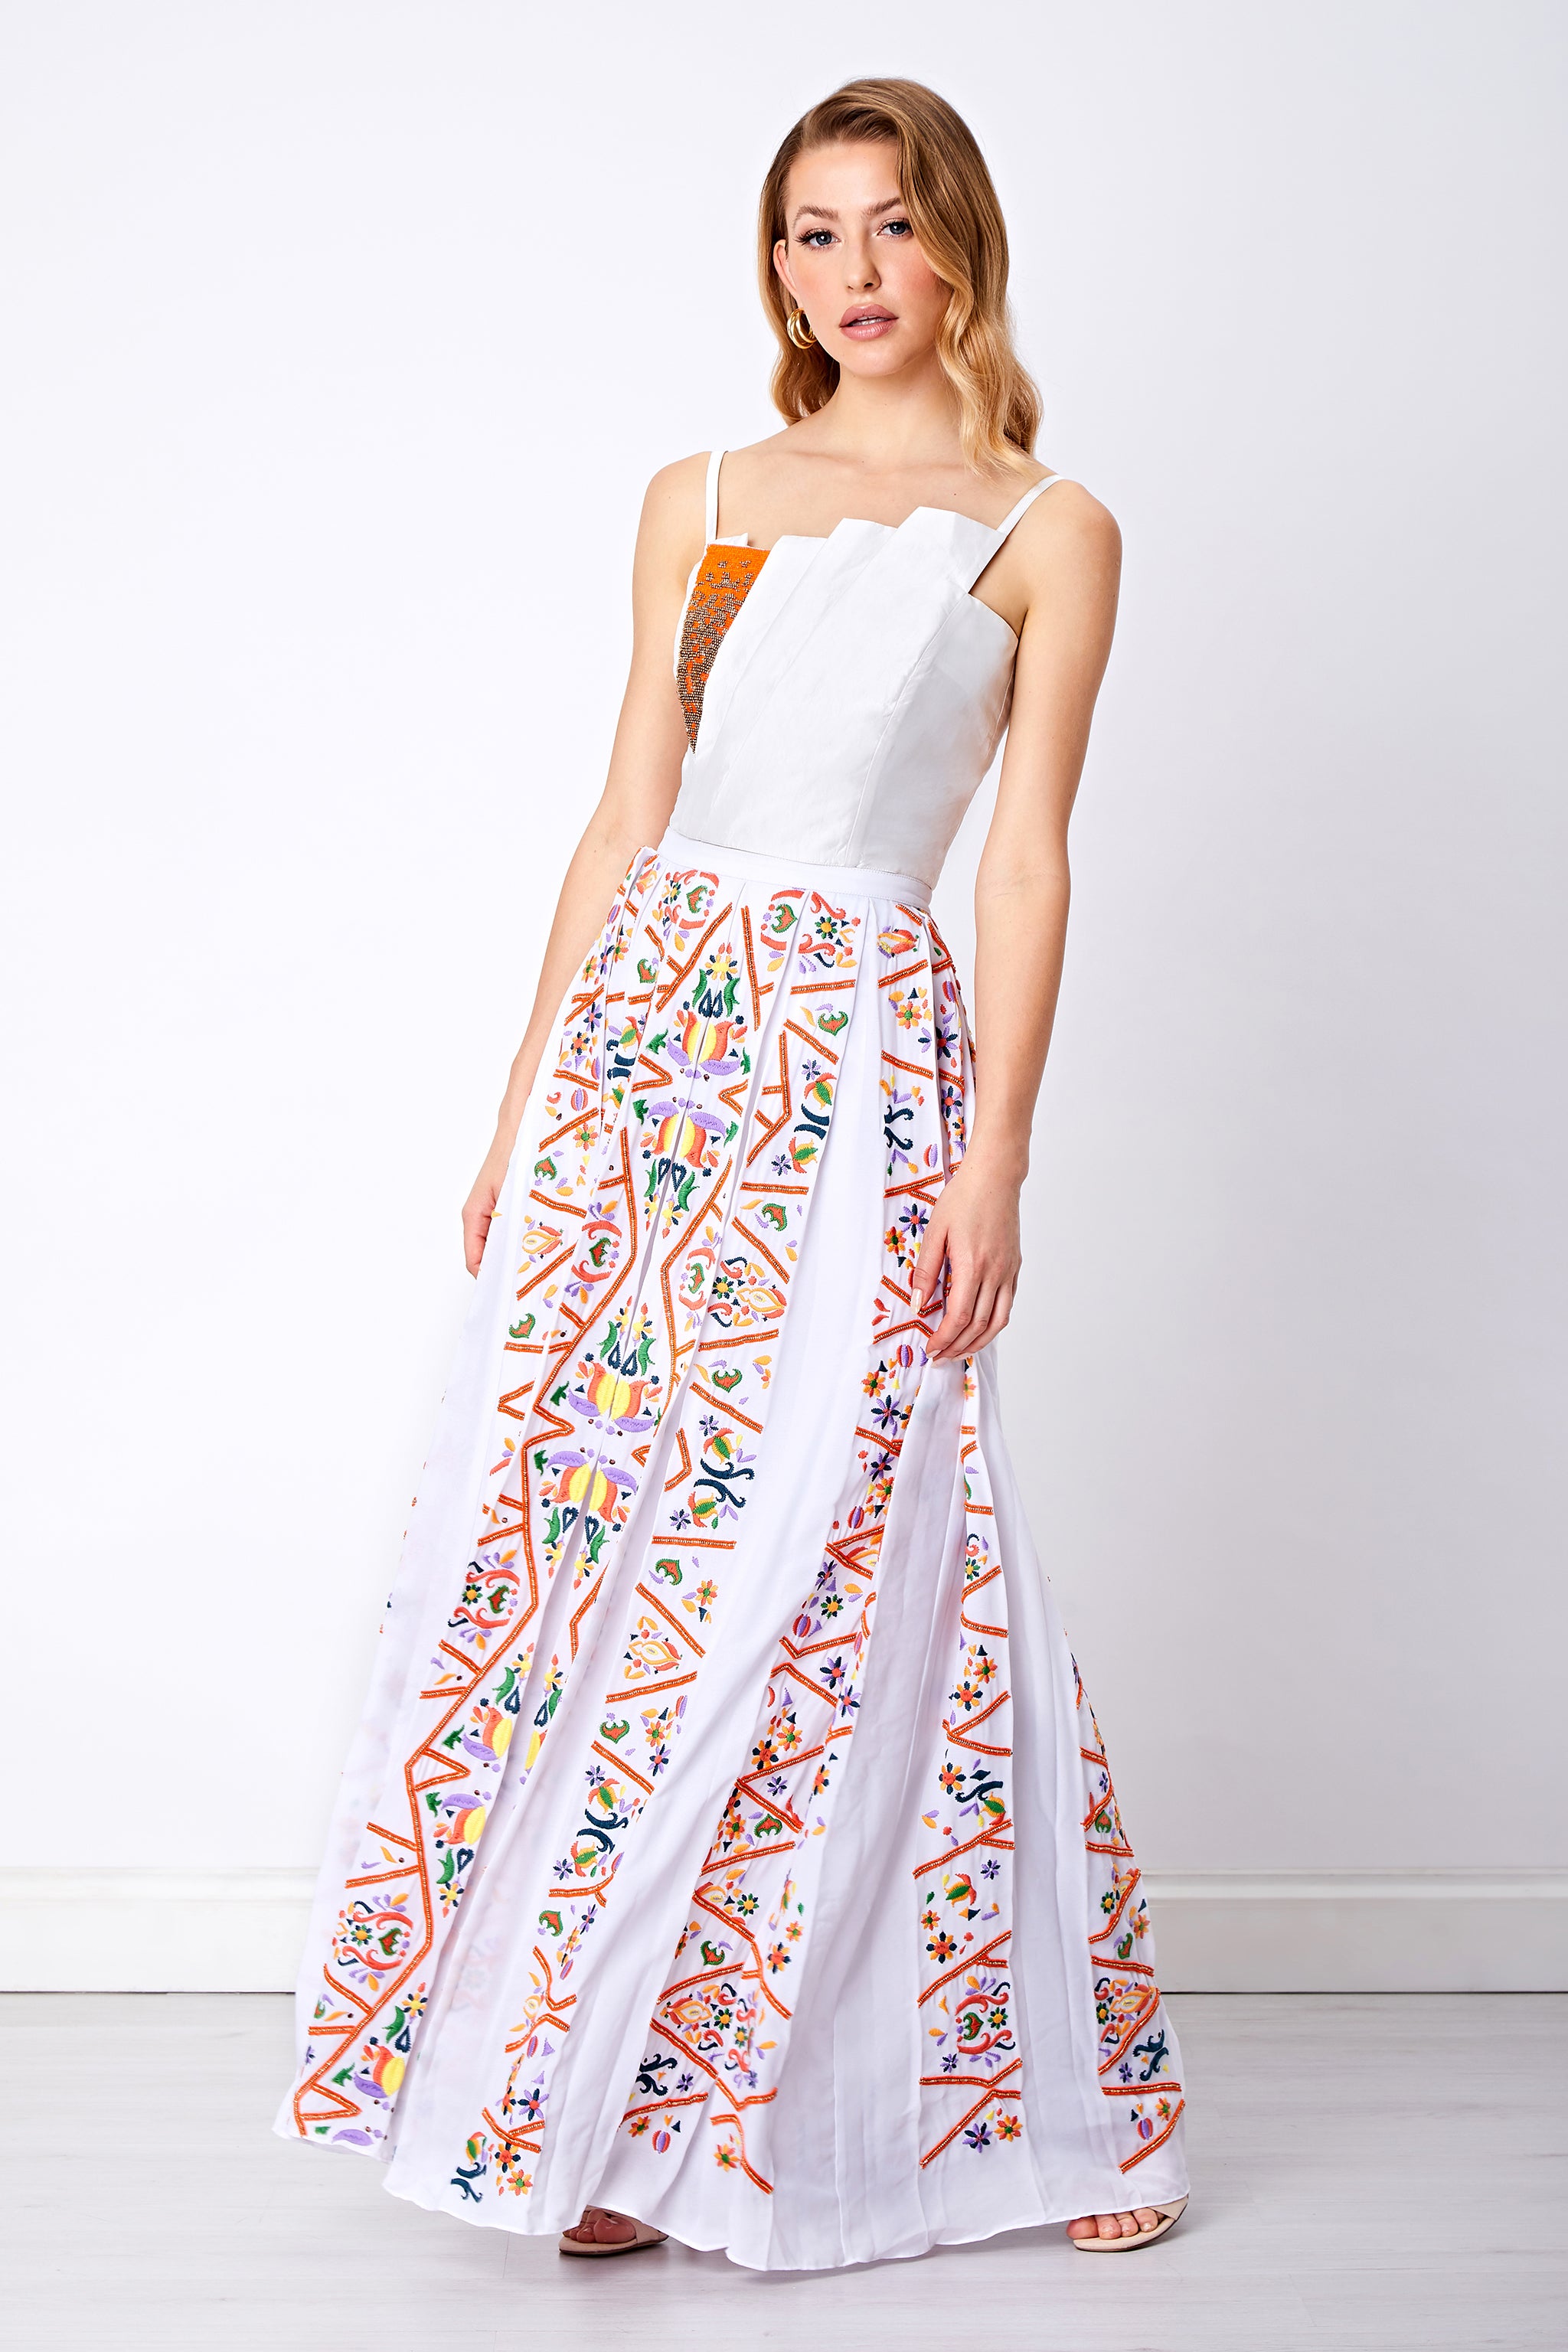 Colorful embellished white box pleated maxi skirt with pleated top